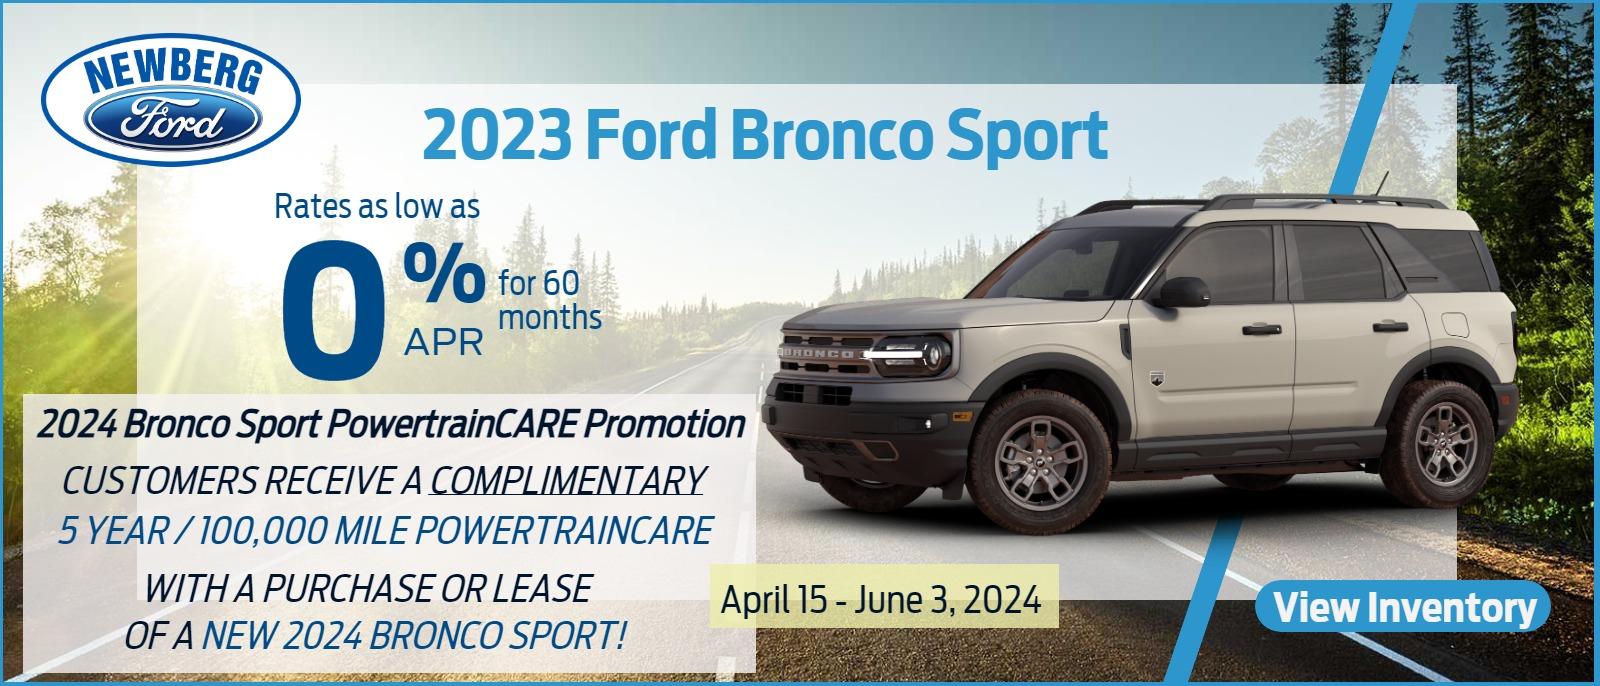 0% APR FOR 60 MONTHS ON NEW 2023 BRONCO SPORT FROM NEWBERG FORD